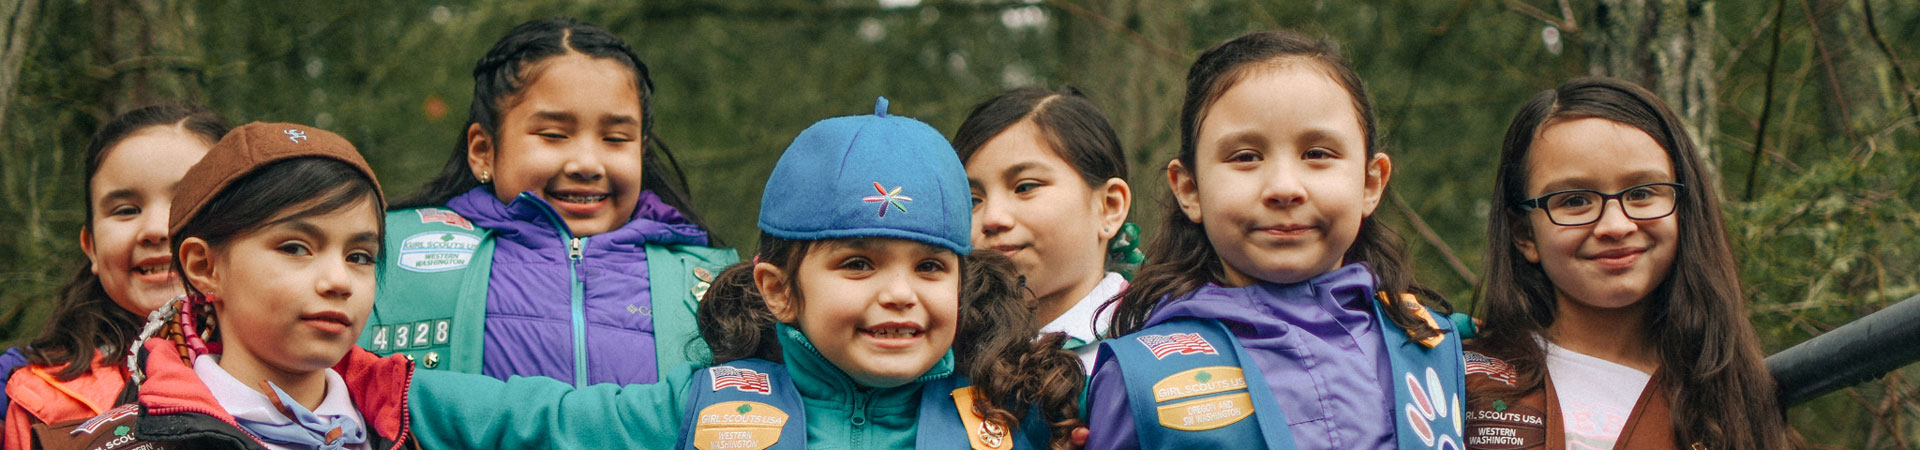  A group of Girl Scouts wearing blue and brown vests gathers in a forest and poses arm-in-arm smiling. 